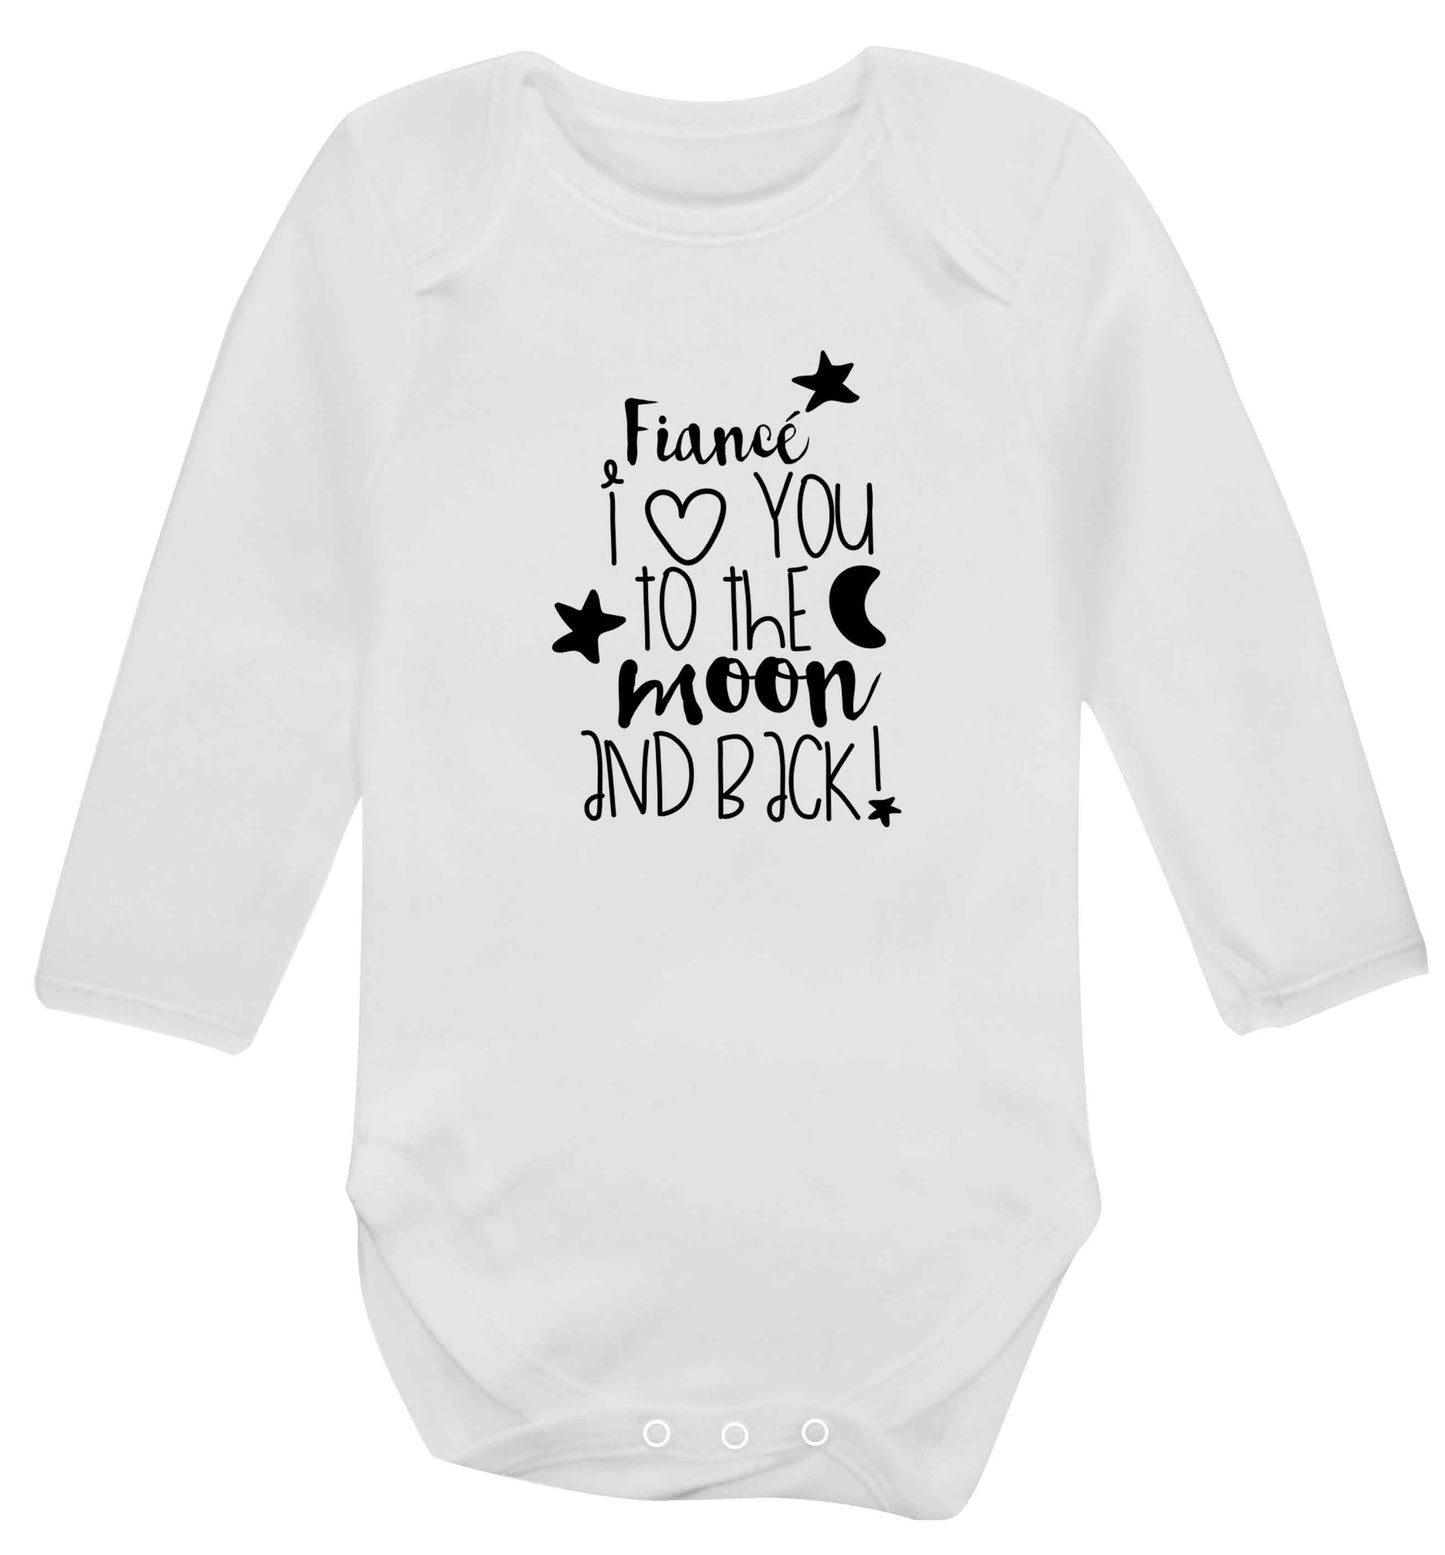 Fianc√© I love you to the moon and back baby vest long sleeved white 6-12 months